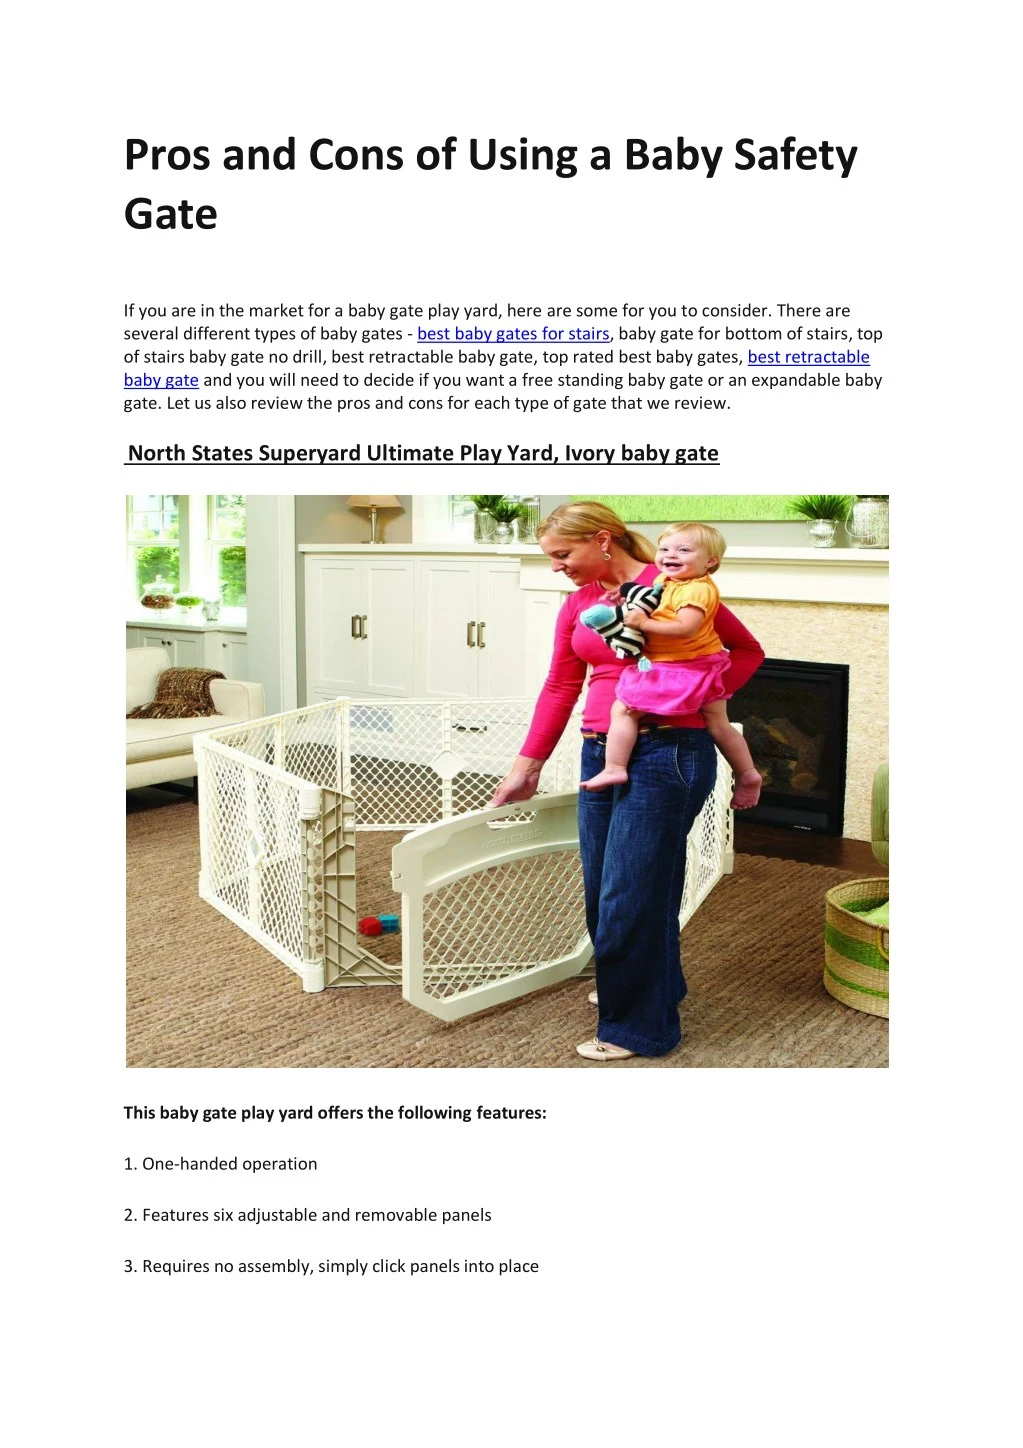 pros and cons of using a baby safety gate